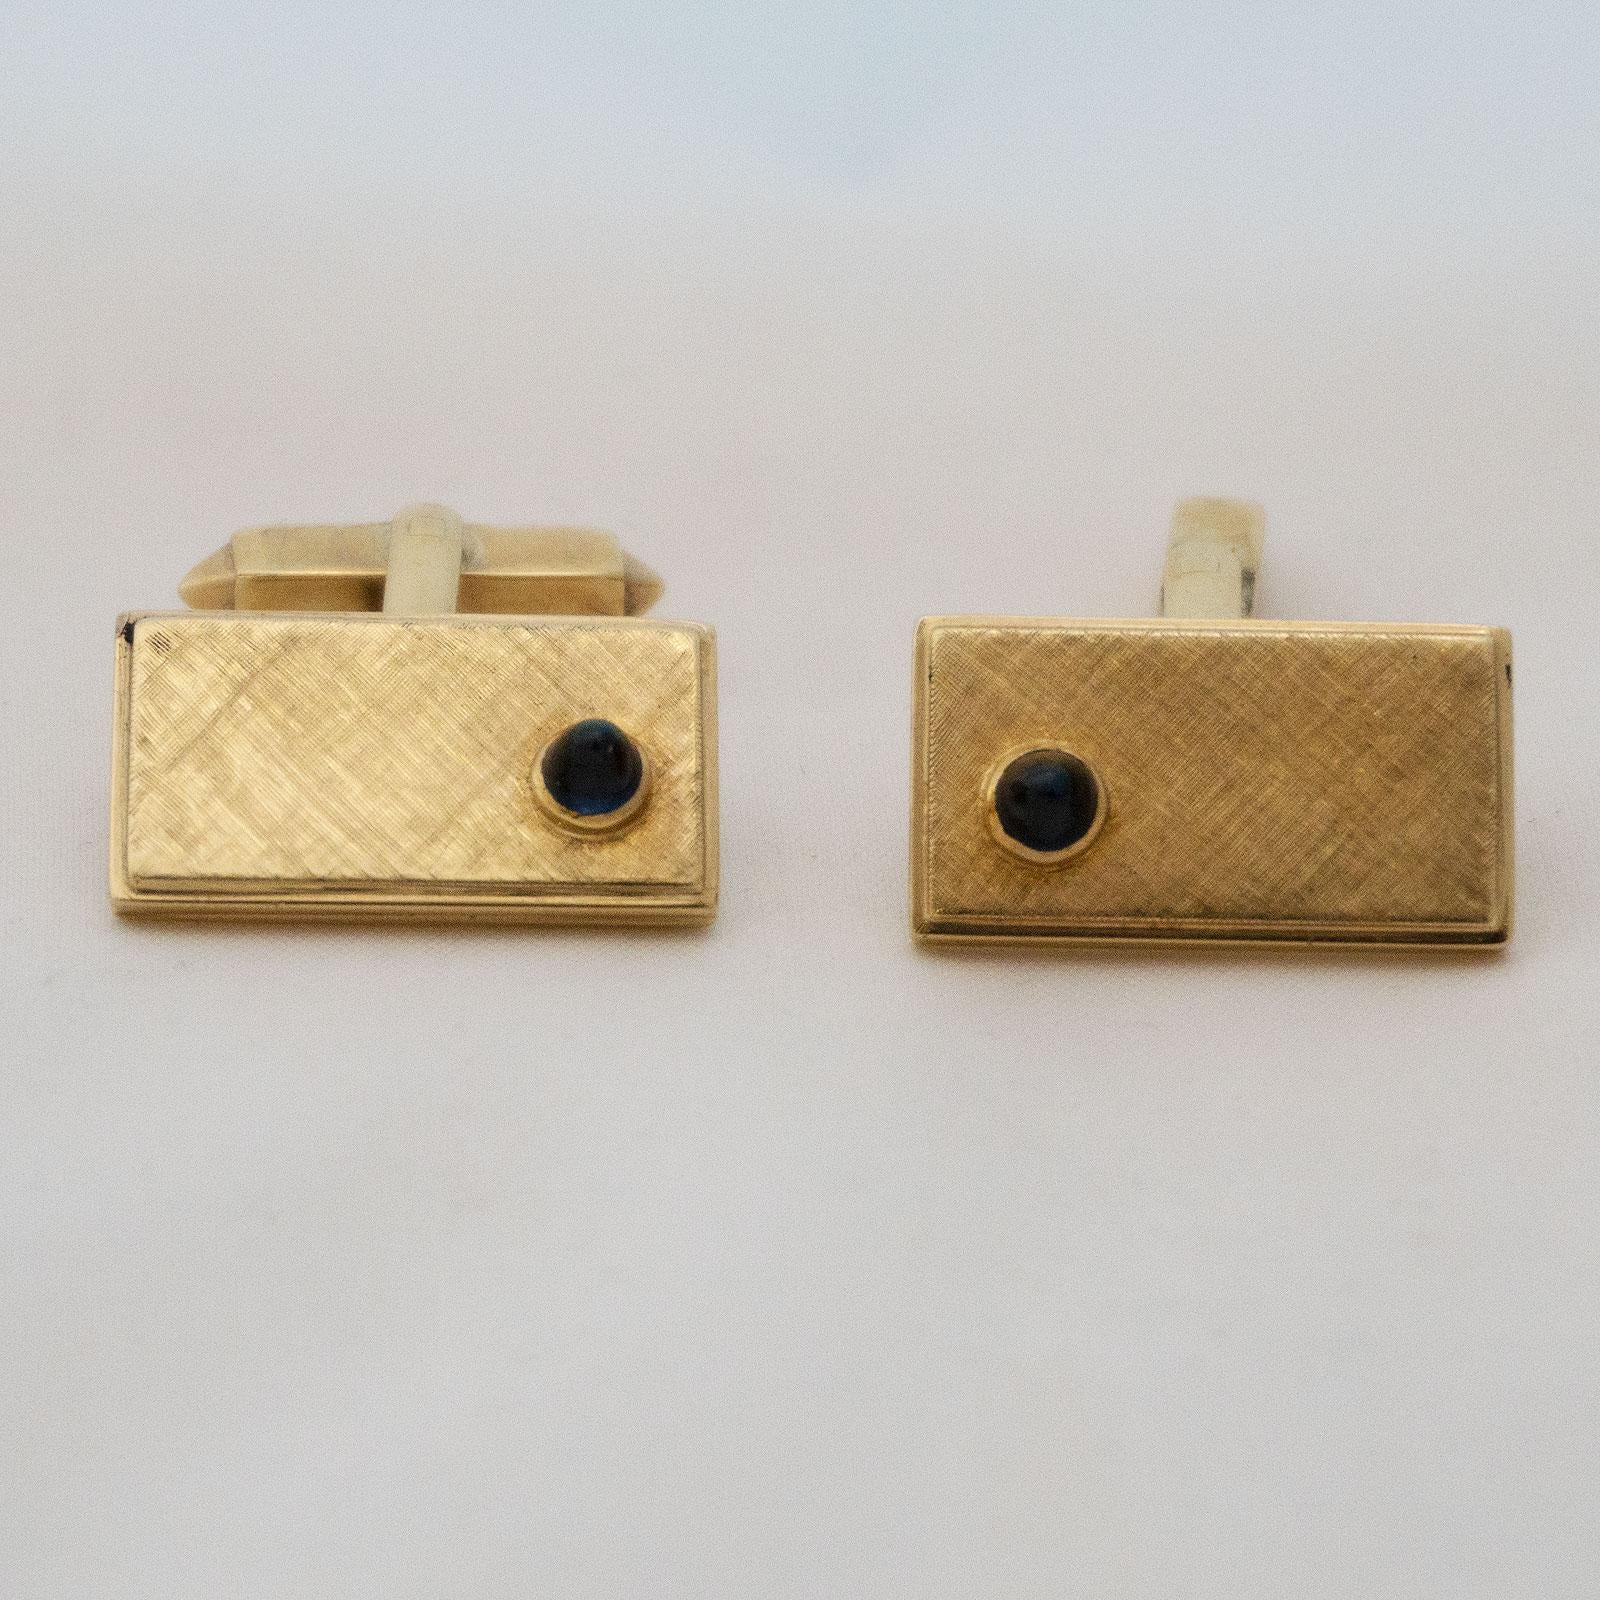 Golden cufflinks with sapphire

For the big gala even the well-groomed gentleman with taste can sometimes let it crack a bit. These cufflinks in heavy gold quality, decorated by a raised sapphire as a cabochon, do not only show the financial success